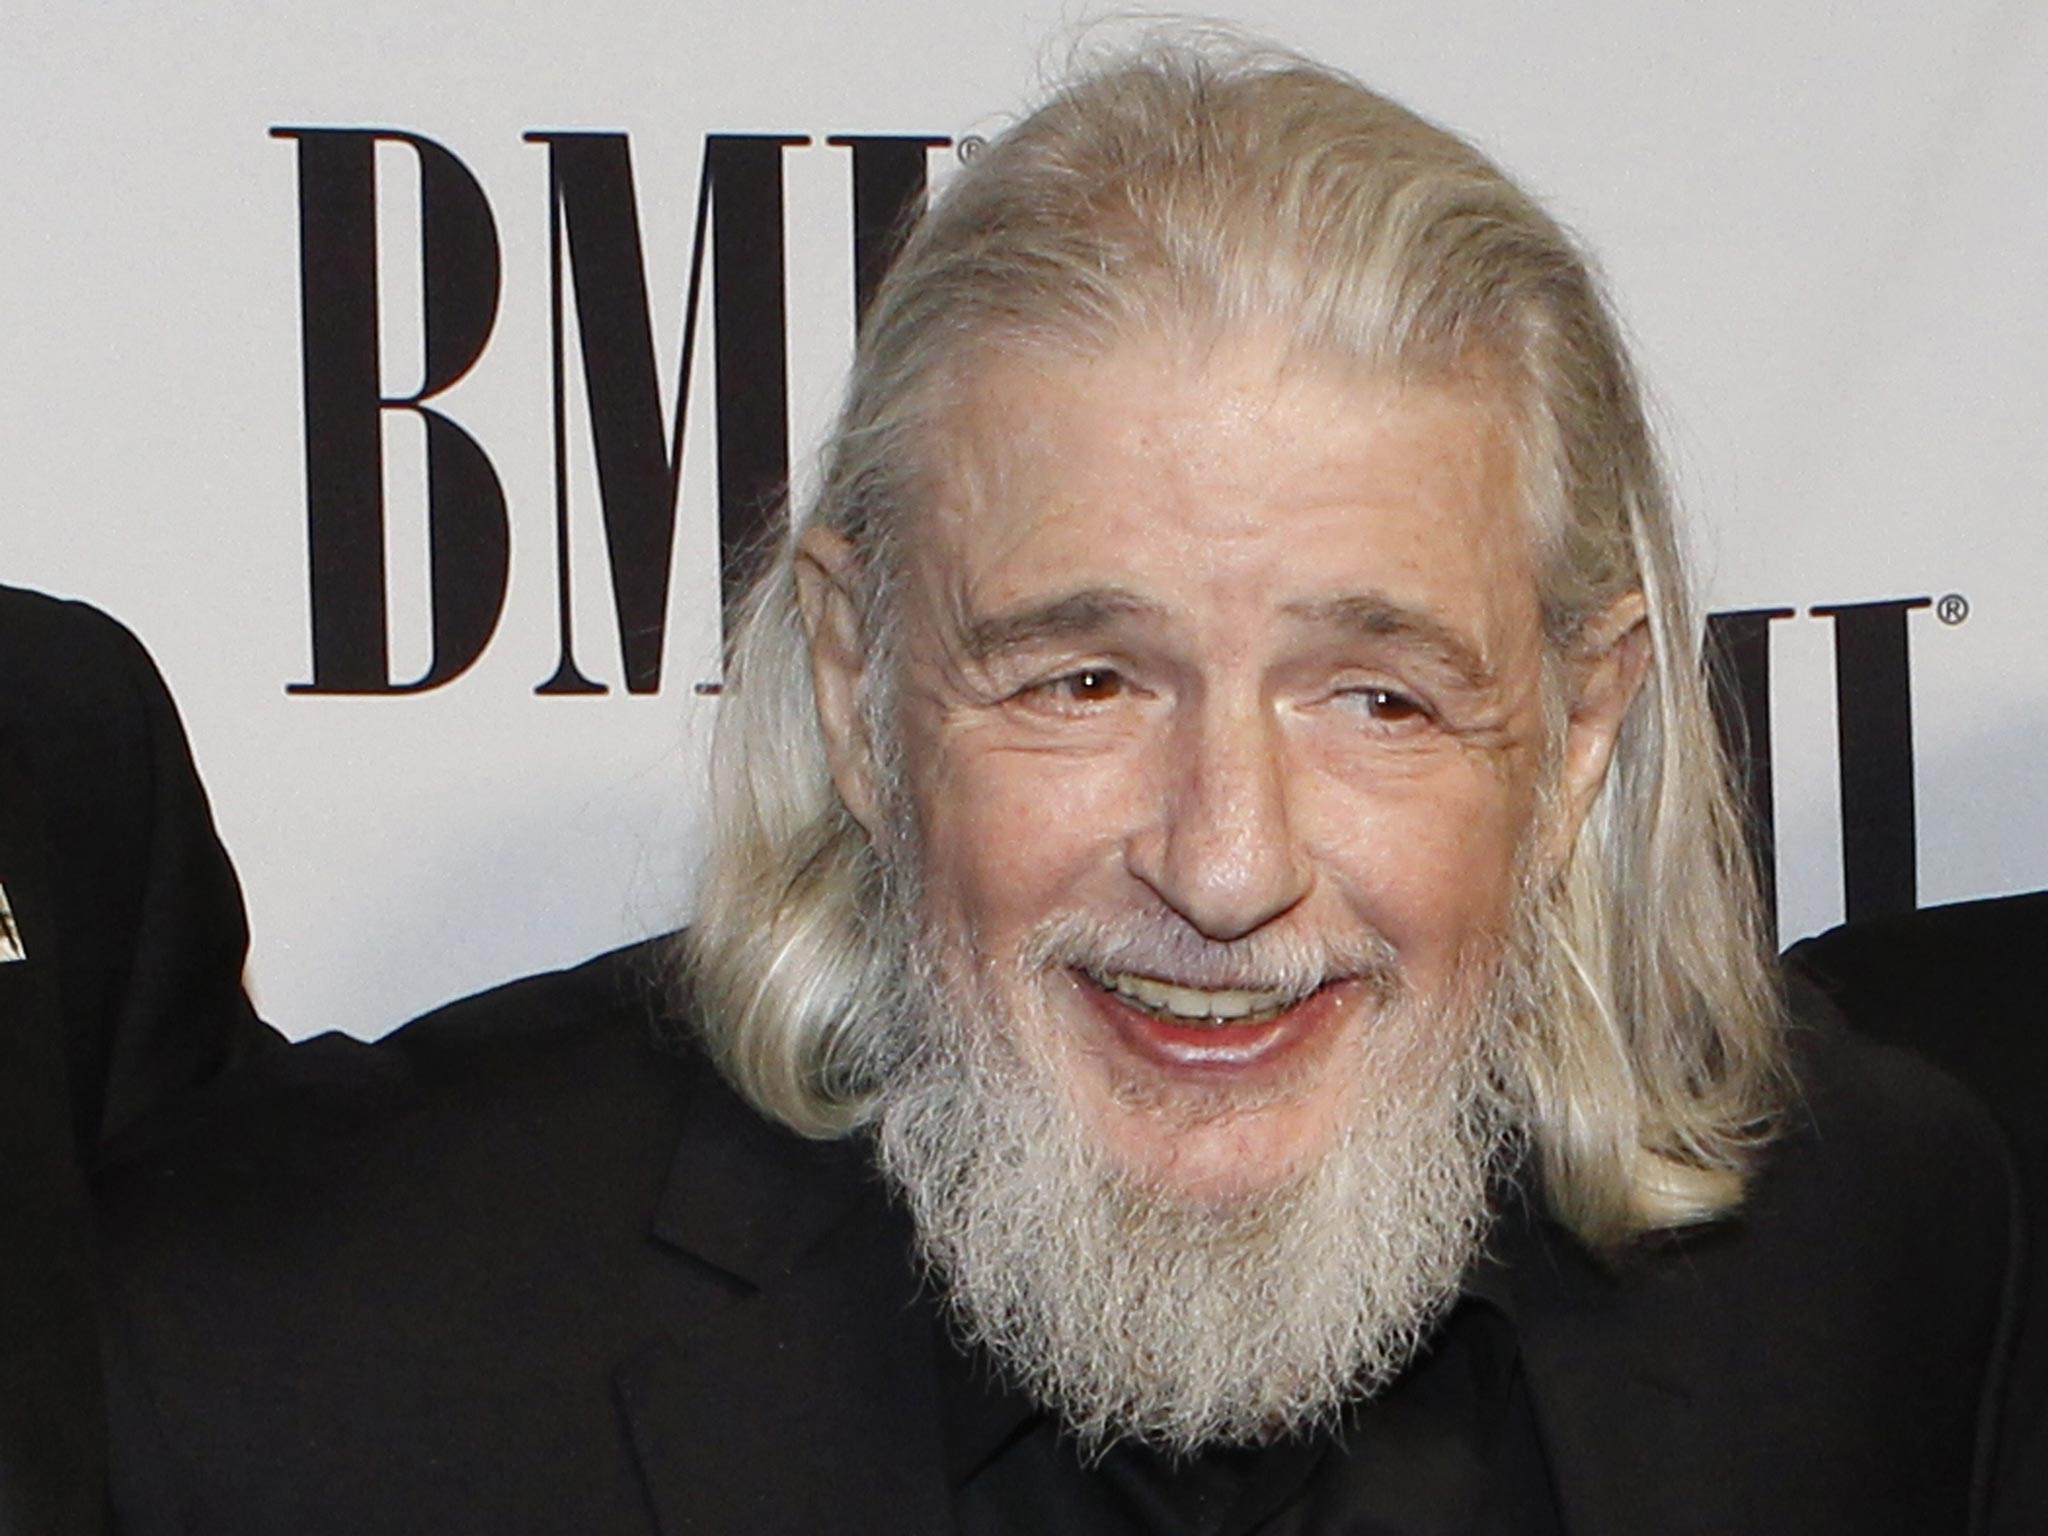 Lyricist Gerry Goffin, who co-wrote some of the biggest hit songs of the 1960s has died